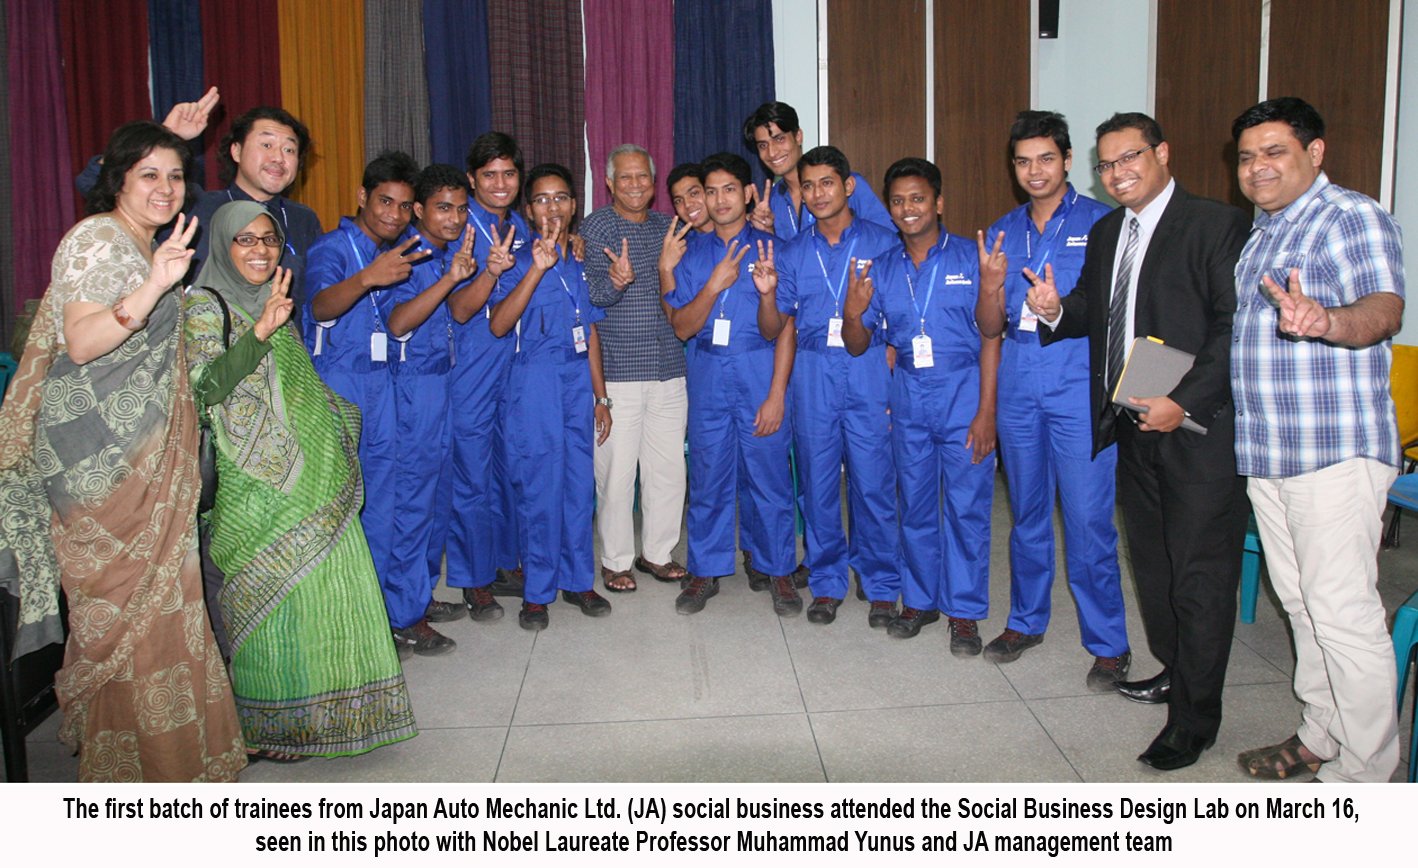 The first batch of trainees from Japan Auto Mechanic Ltd. (JA) social business attended the Social Business Design Lab on March 16,  seen in this photo with Nobel Laureate Professor Muhammad Yunus and JA management team